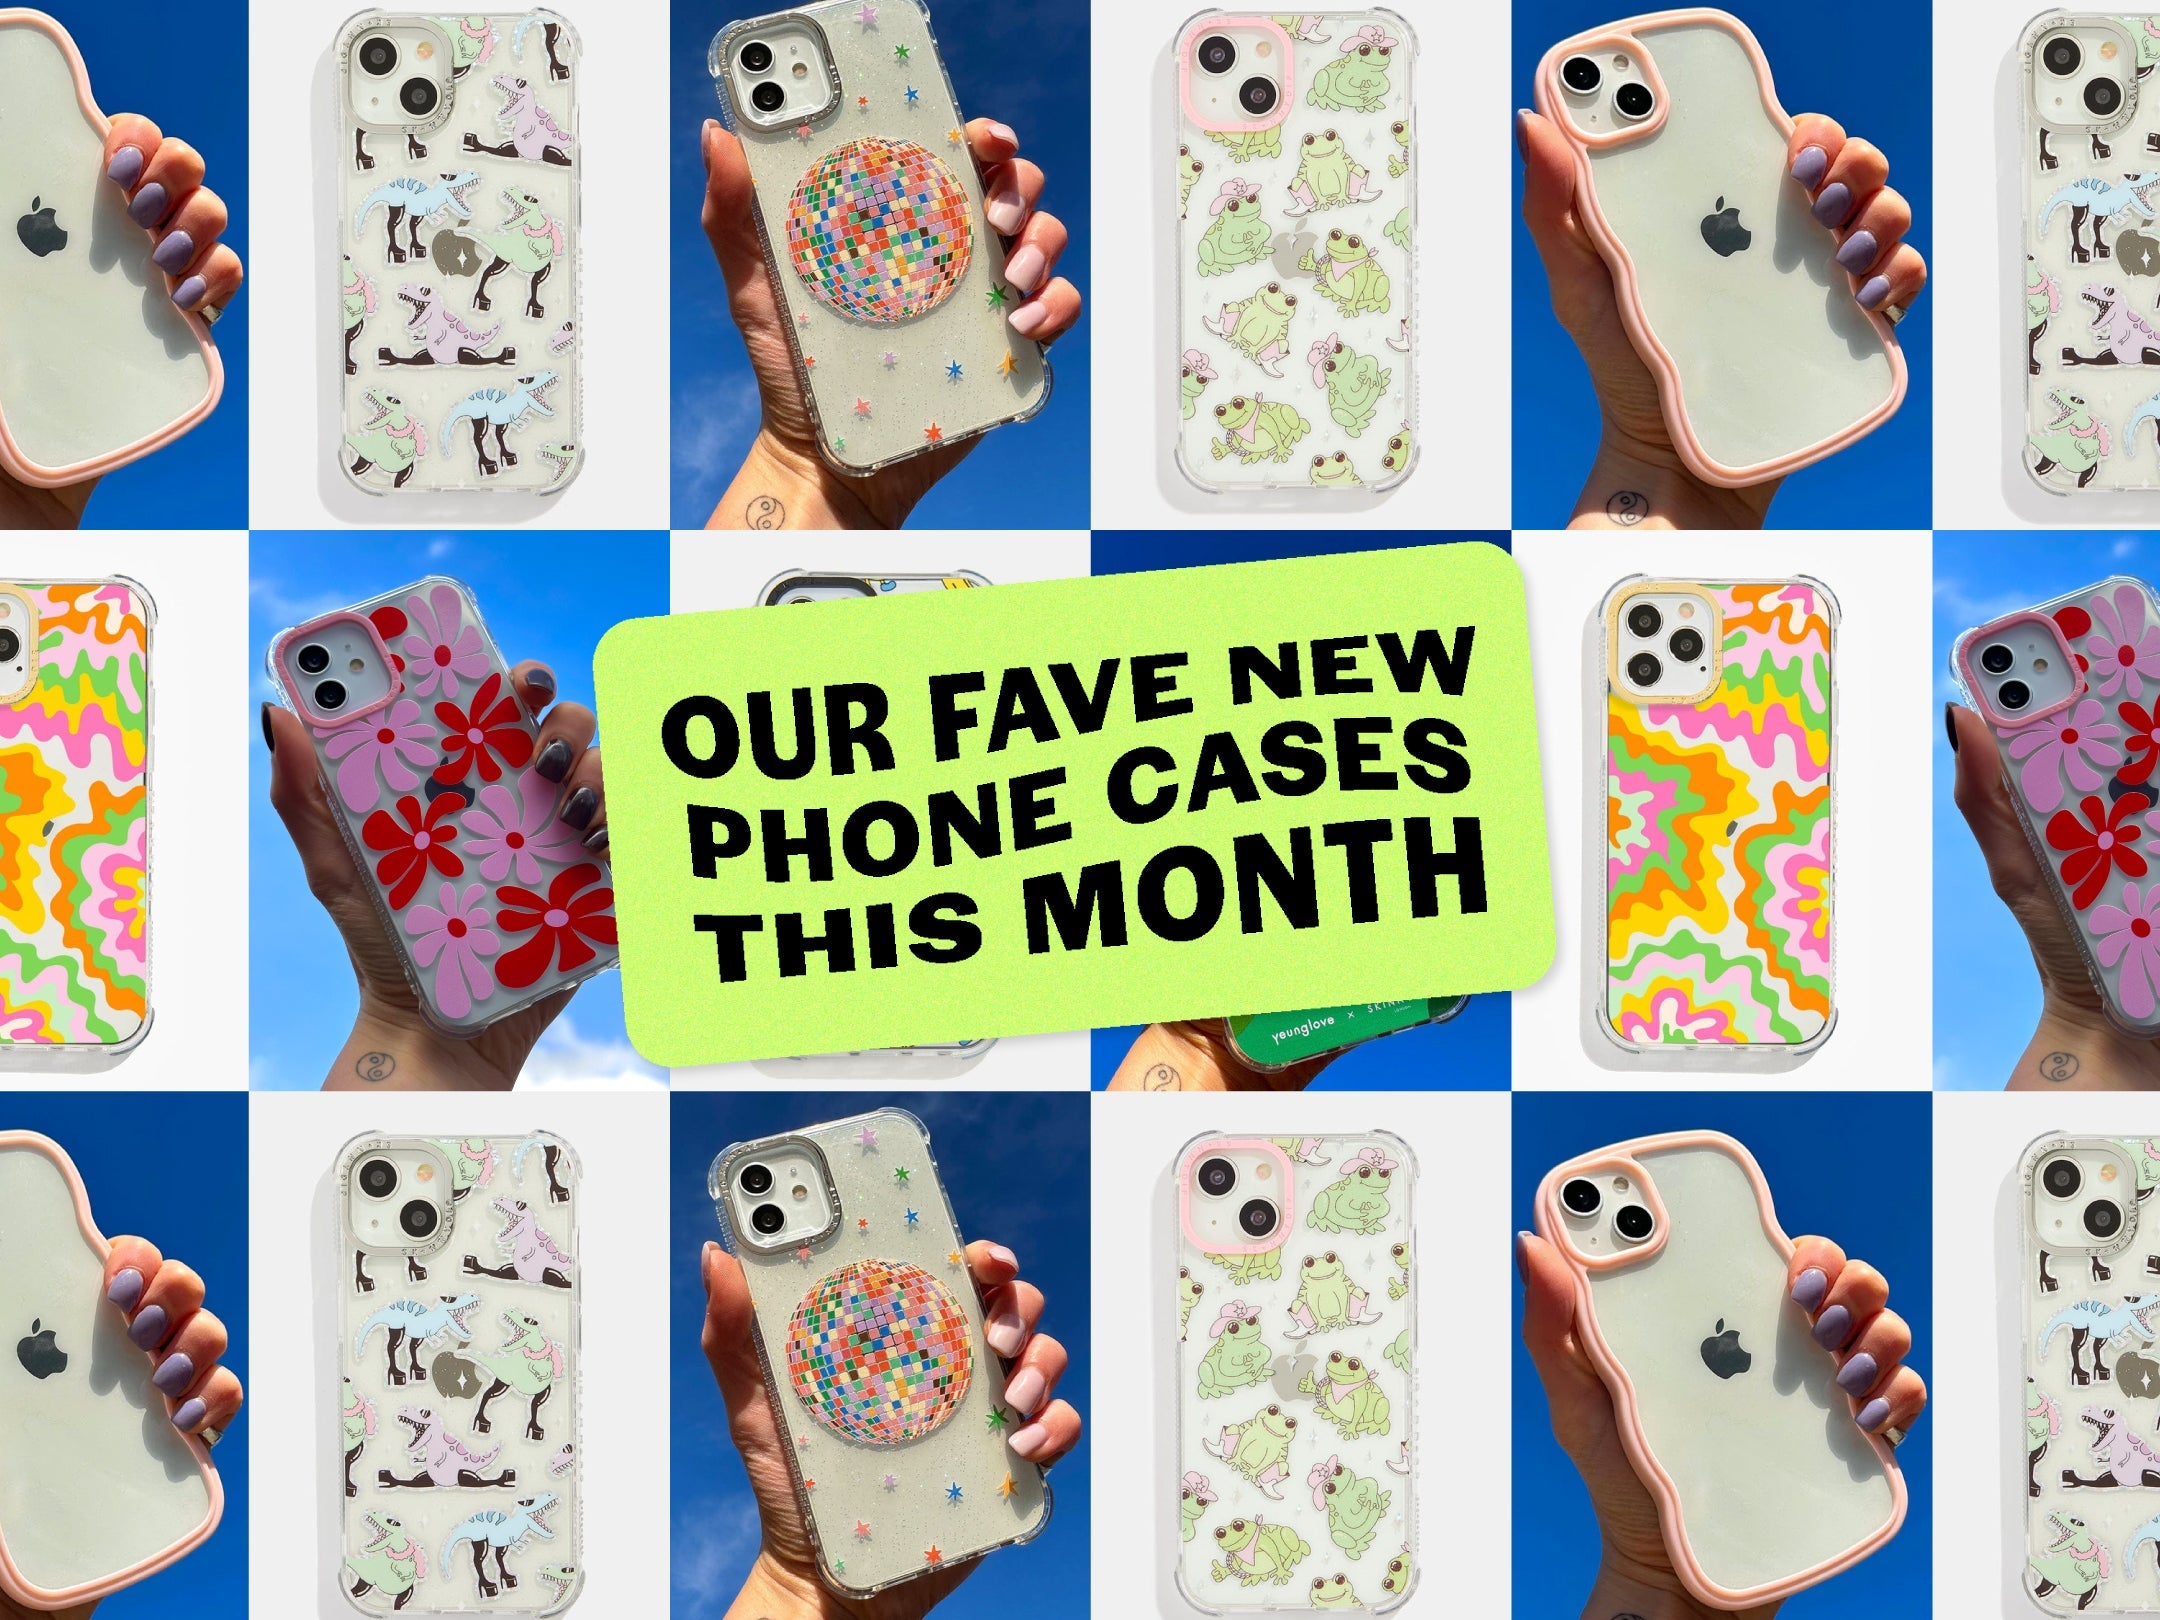 Our Fave New Phone Cases This Month